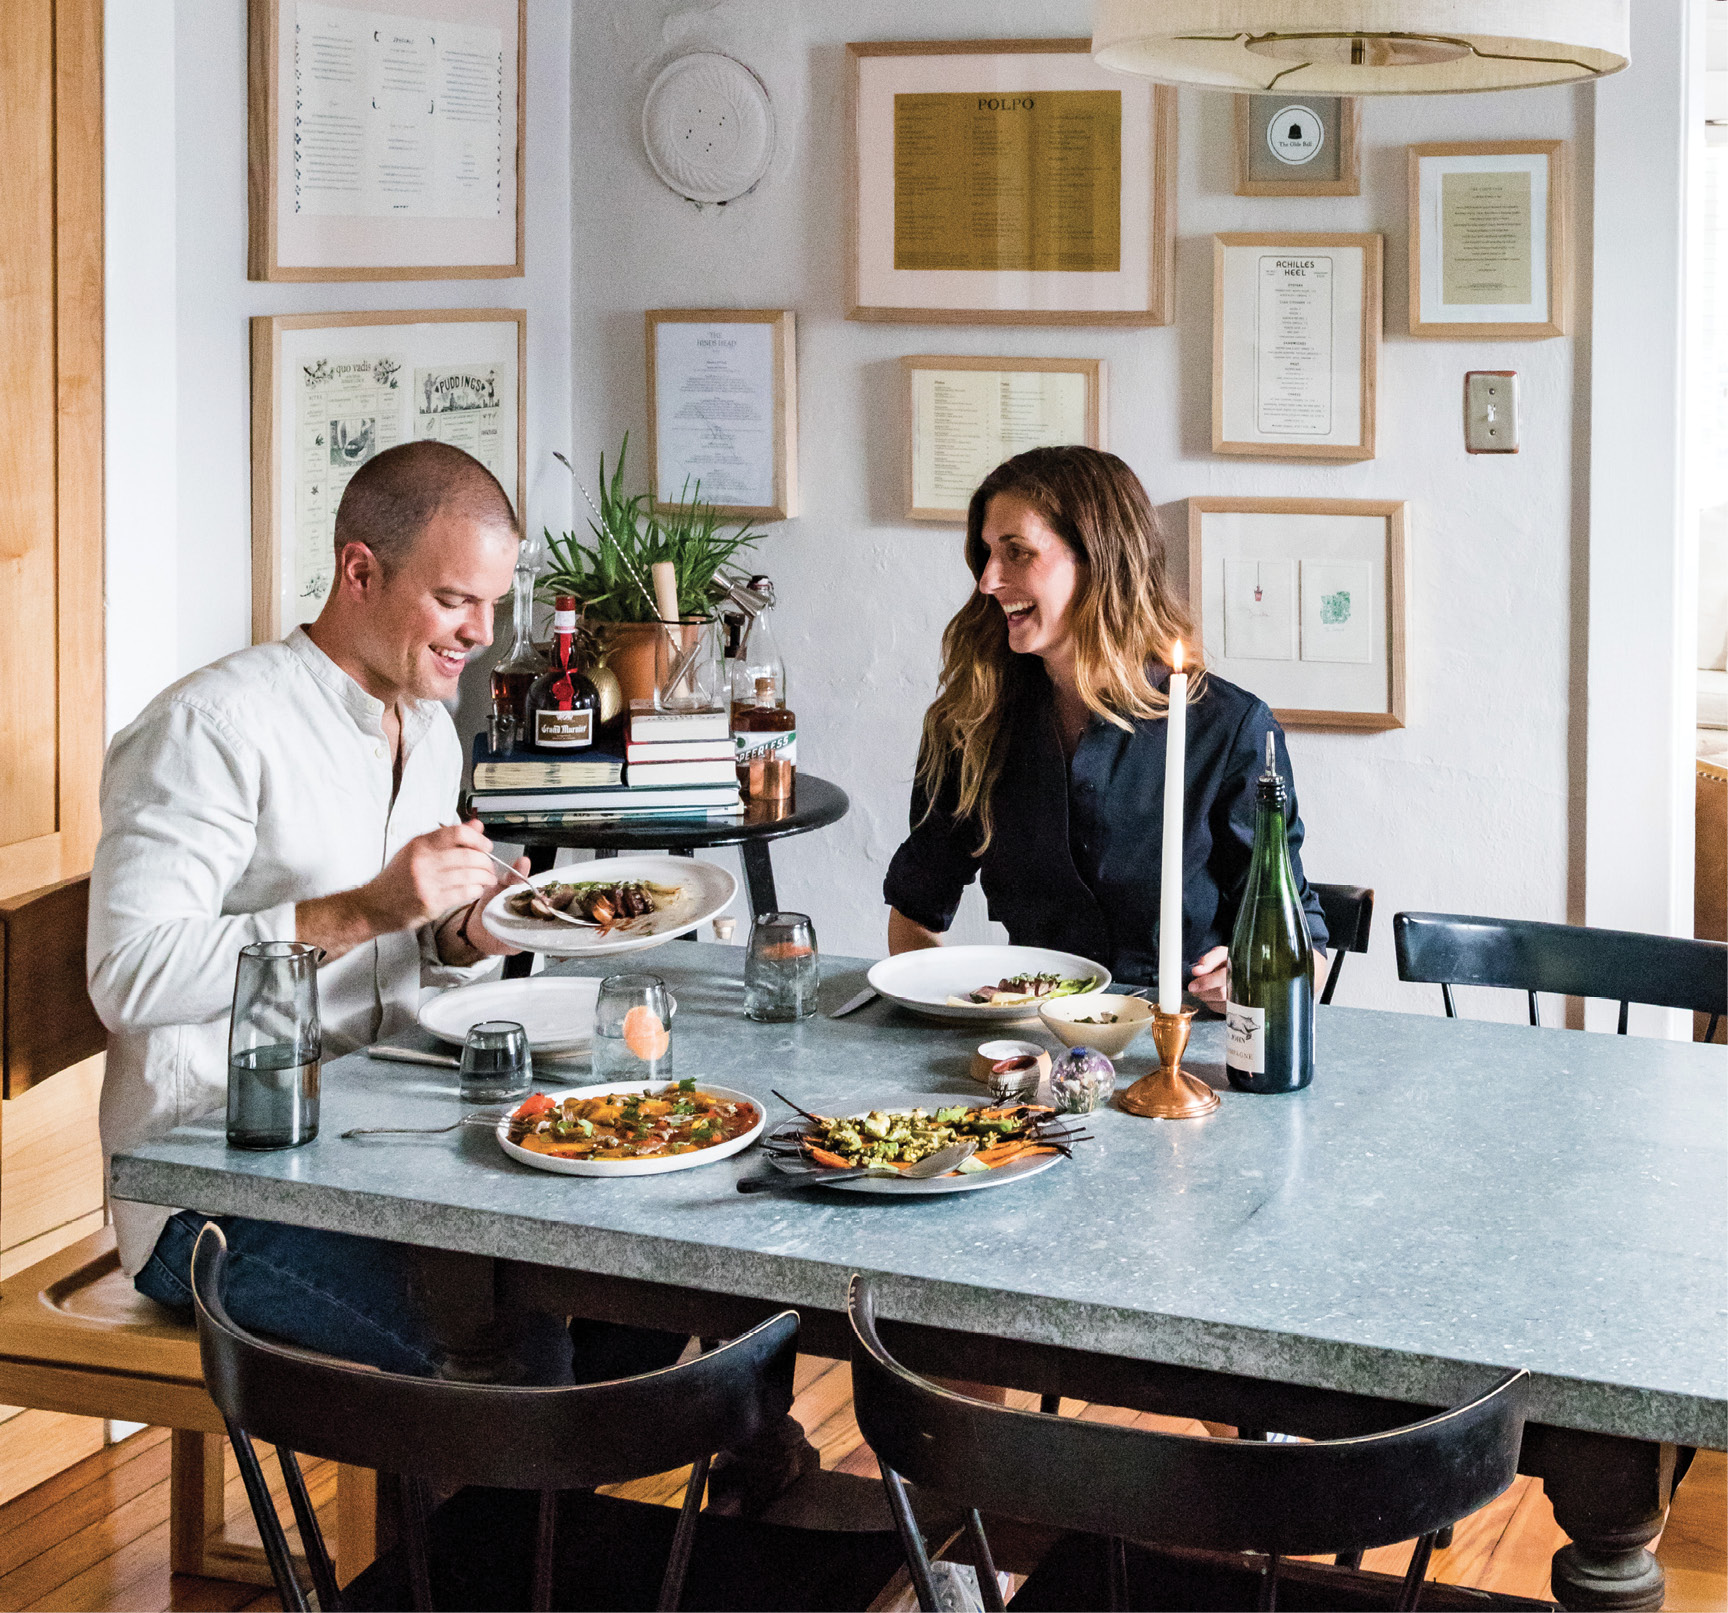 Cozy dinners at home are a welcome reprieve for the busy entrepreneurs. Plus, special touches like lit candles and beautifully garnished dishes make the case for spending date night in.